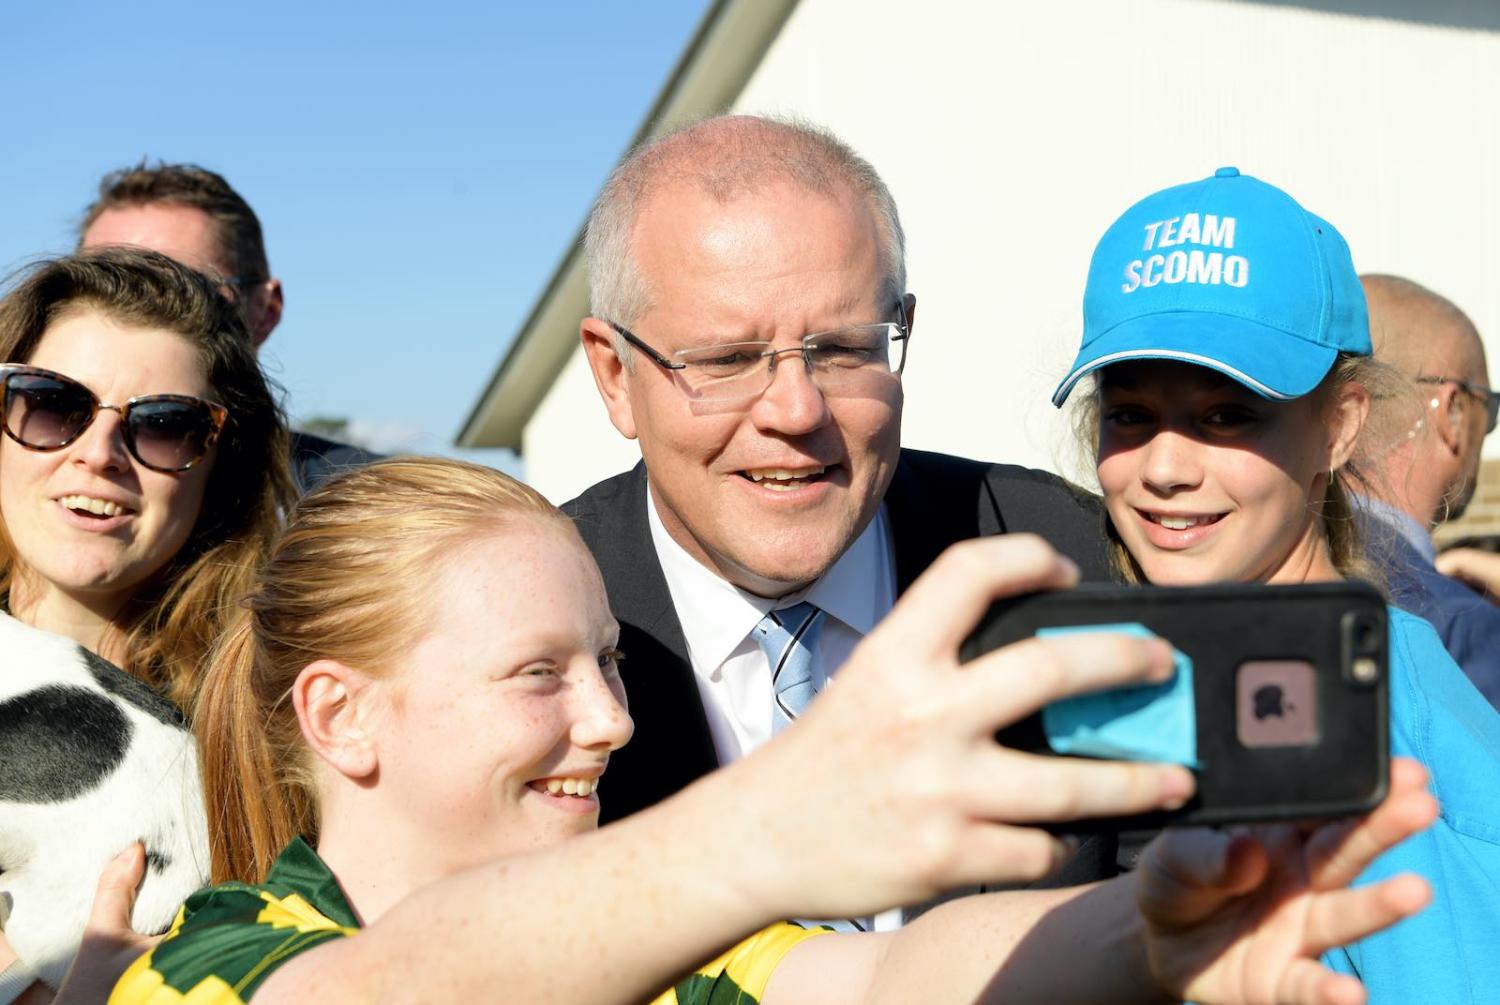 Prime Minister Scott Morrison poses for a pic after he cast his vote at Lilli Pilli Public School, Cronulla, NSW, 18 May 2019 (Tracey Nearmy/Getty Images)